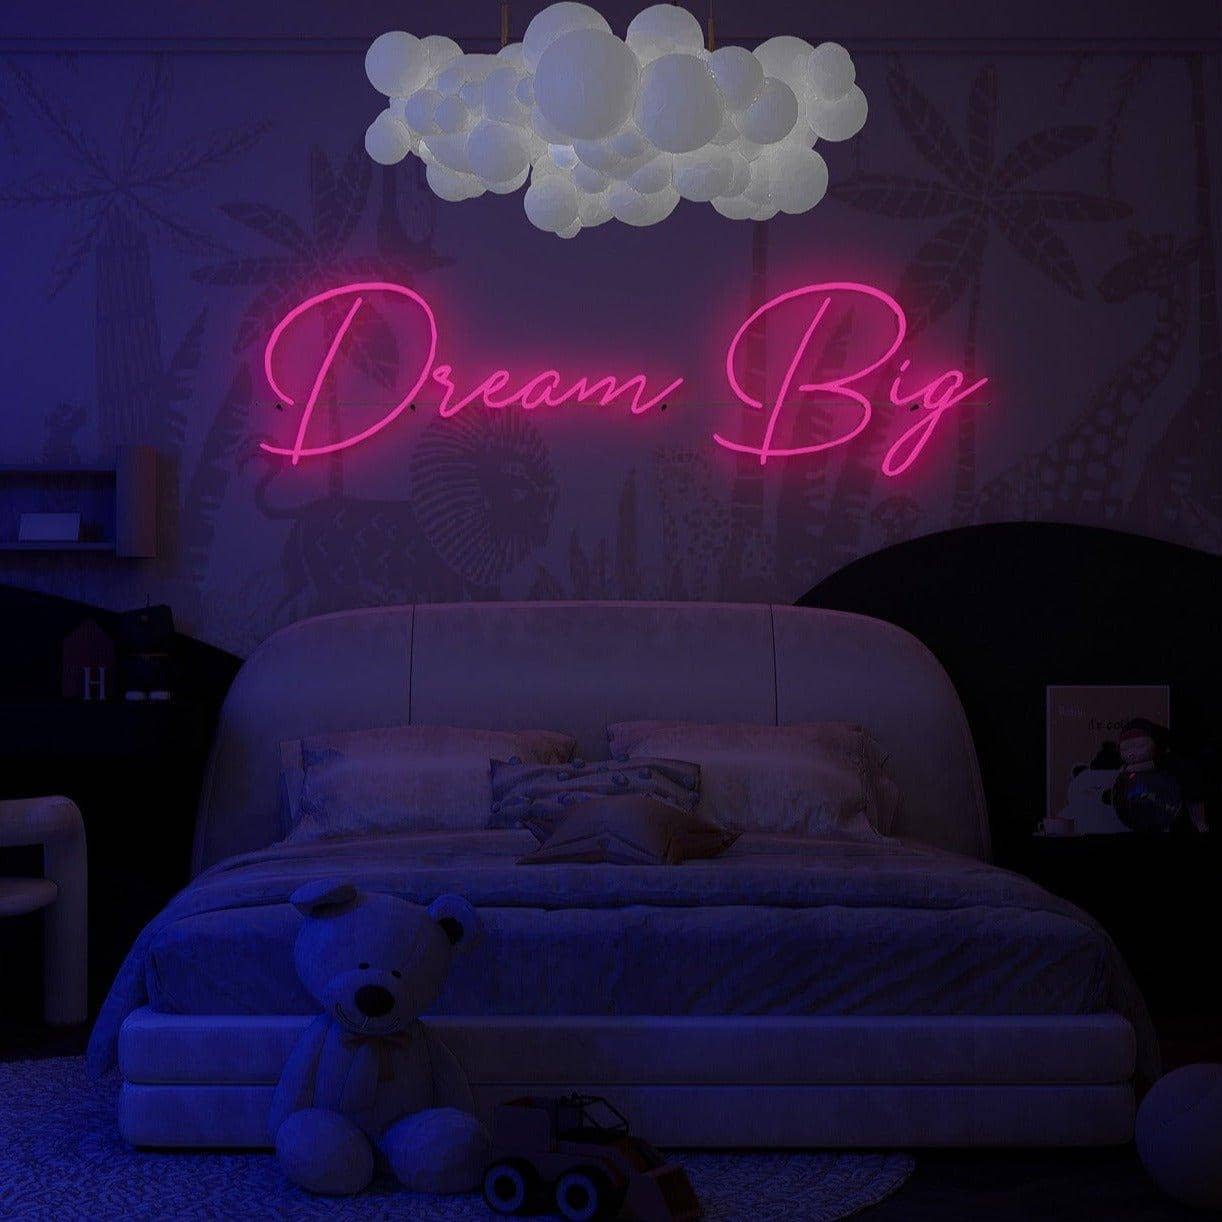 the-pink-neon-light-lights-up-in-the-dark-and-is-displayed-in-the-bedroom-dream-big